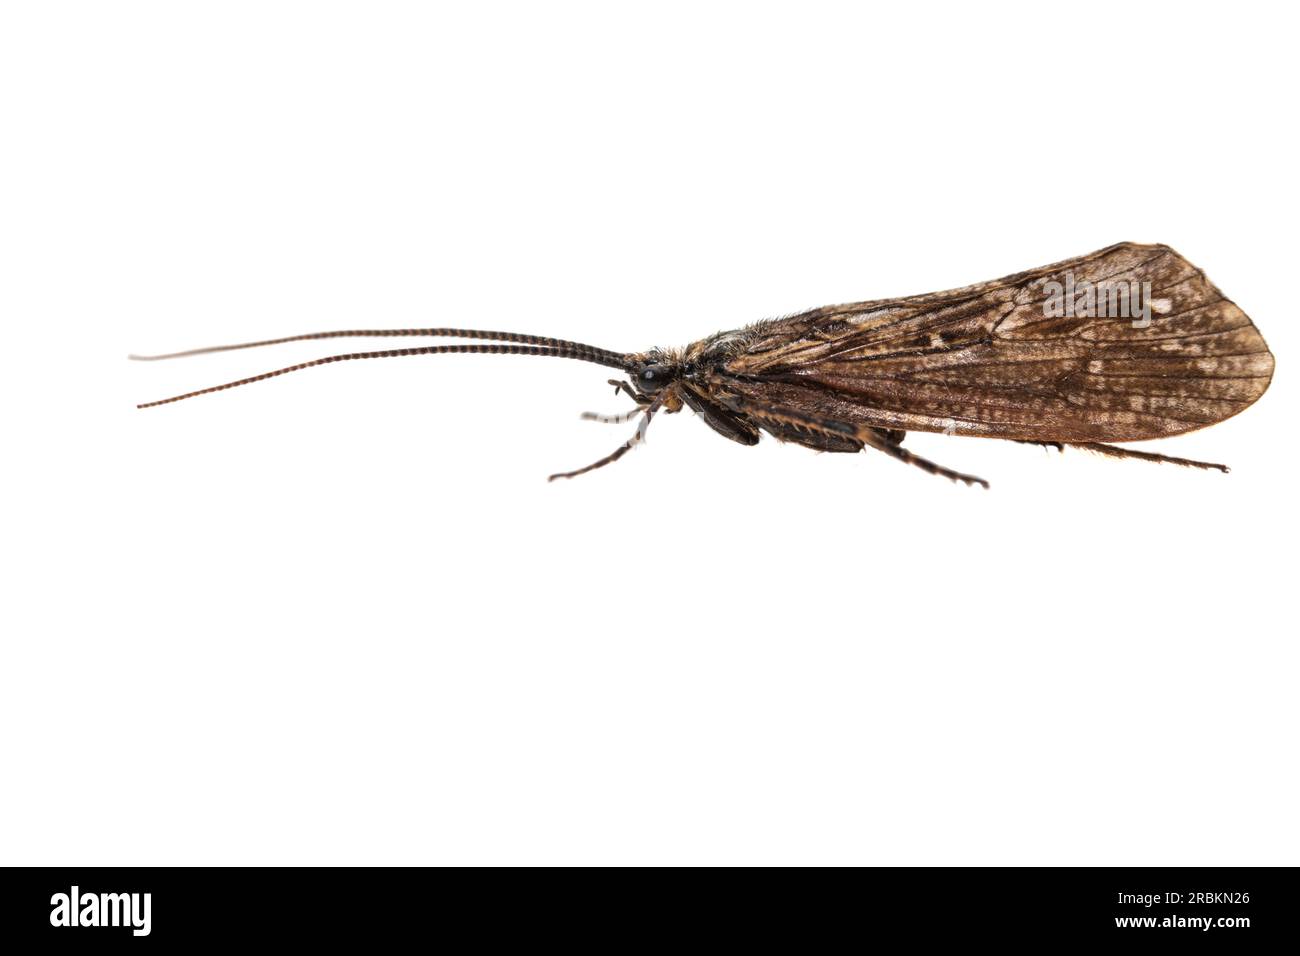 Two-spotted Great Reed Sedge (Phryganea bipunctata), side view, cut out, Netherlands Stock Photo